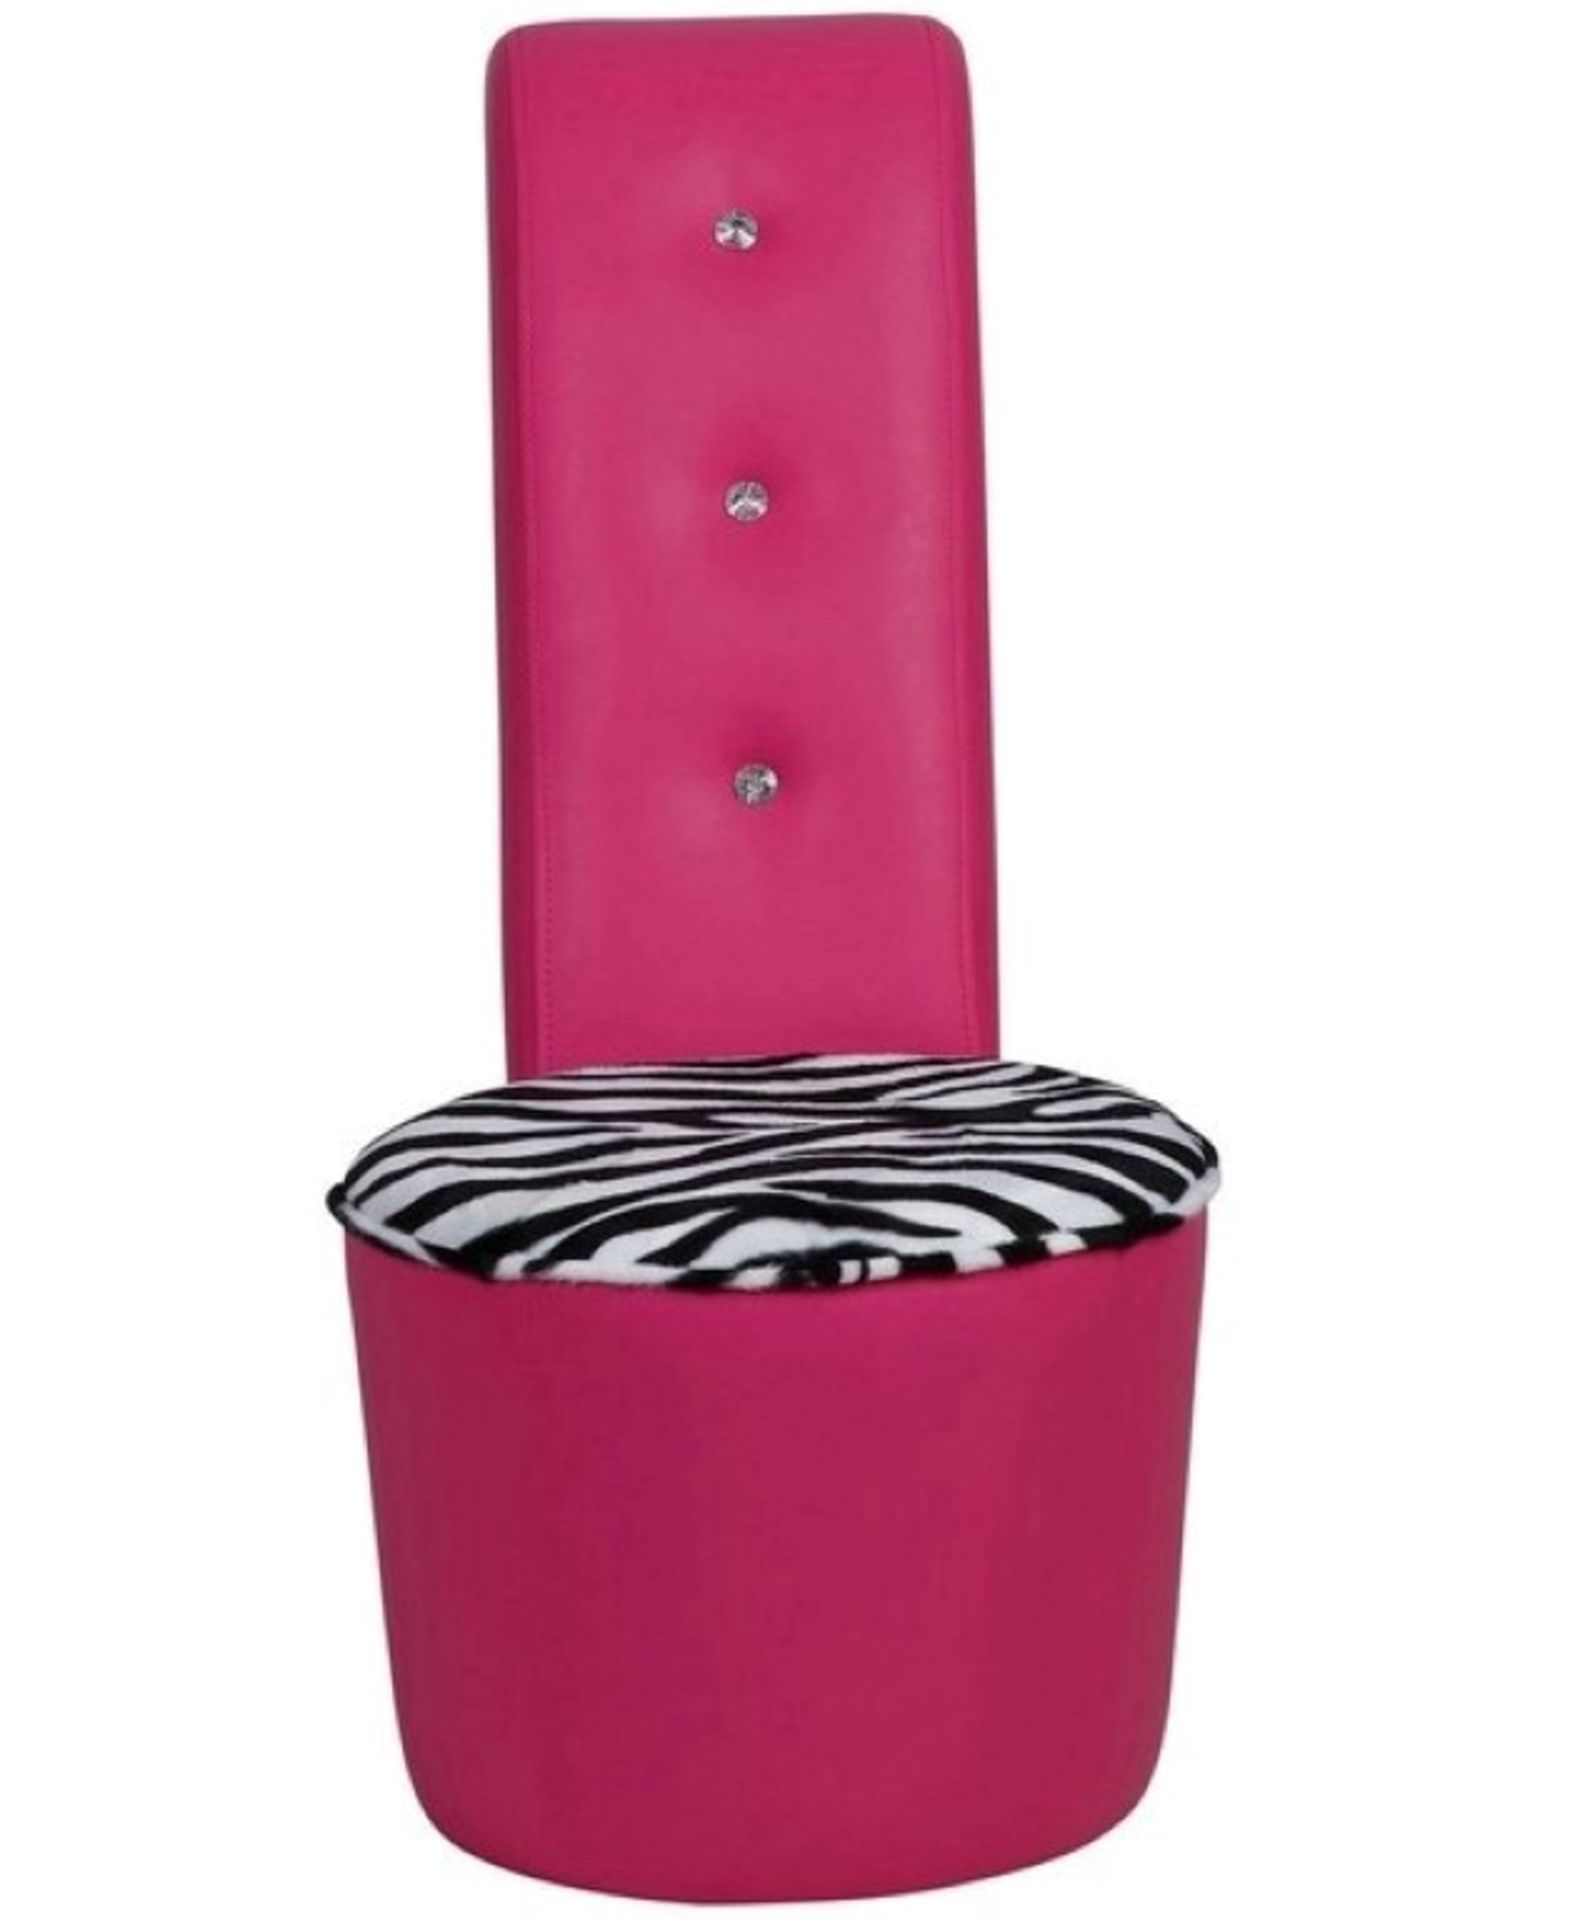 1 x Girls PINK Stiletto Chair - Black Faux Leather with Diamantes & Zebra Print Design - Brand New & - Image 2 of 2